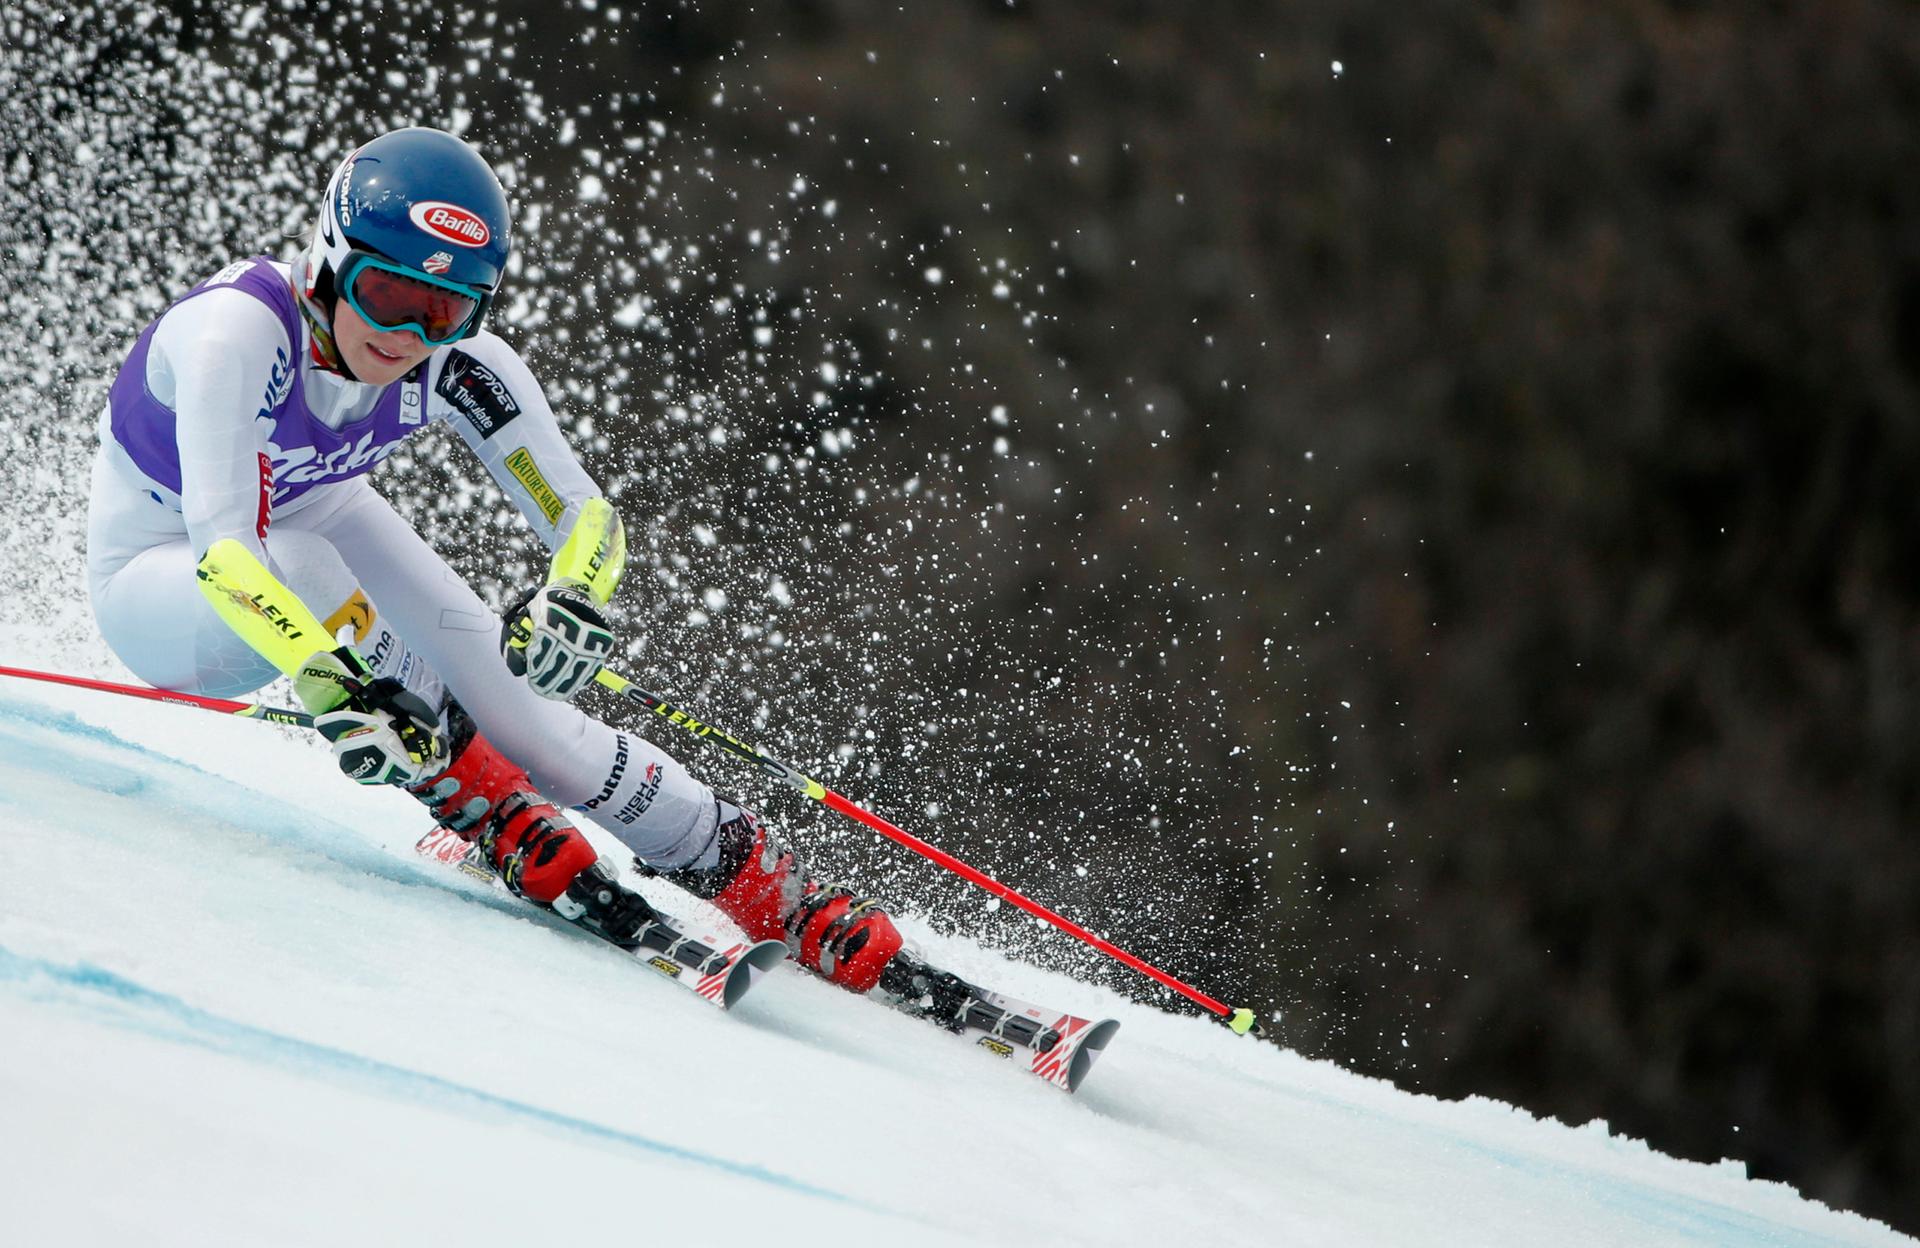 Mikaela Shiffrin of the U.S. at the Alpine Skiing World Cup Finals in Meribel, in the French Alps, March 22, 2015.